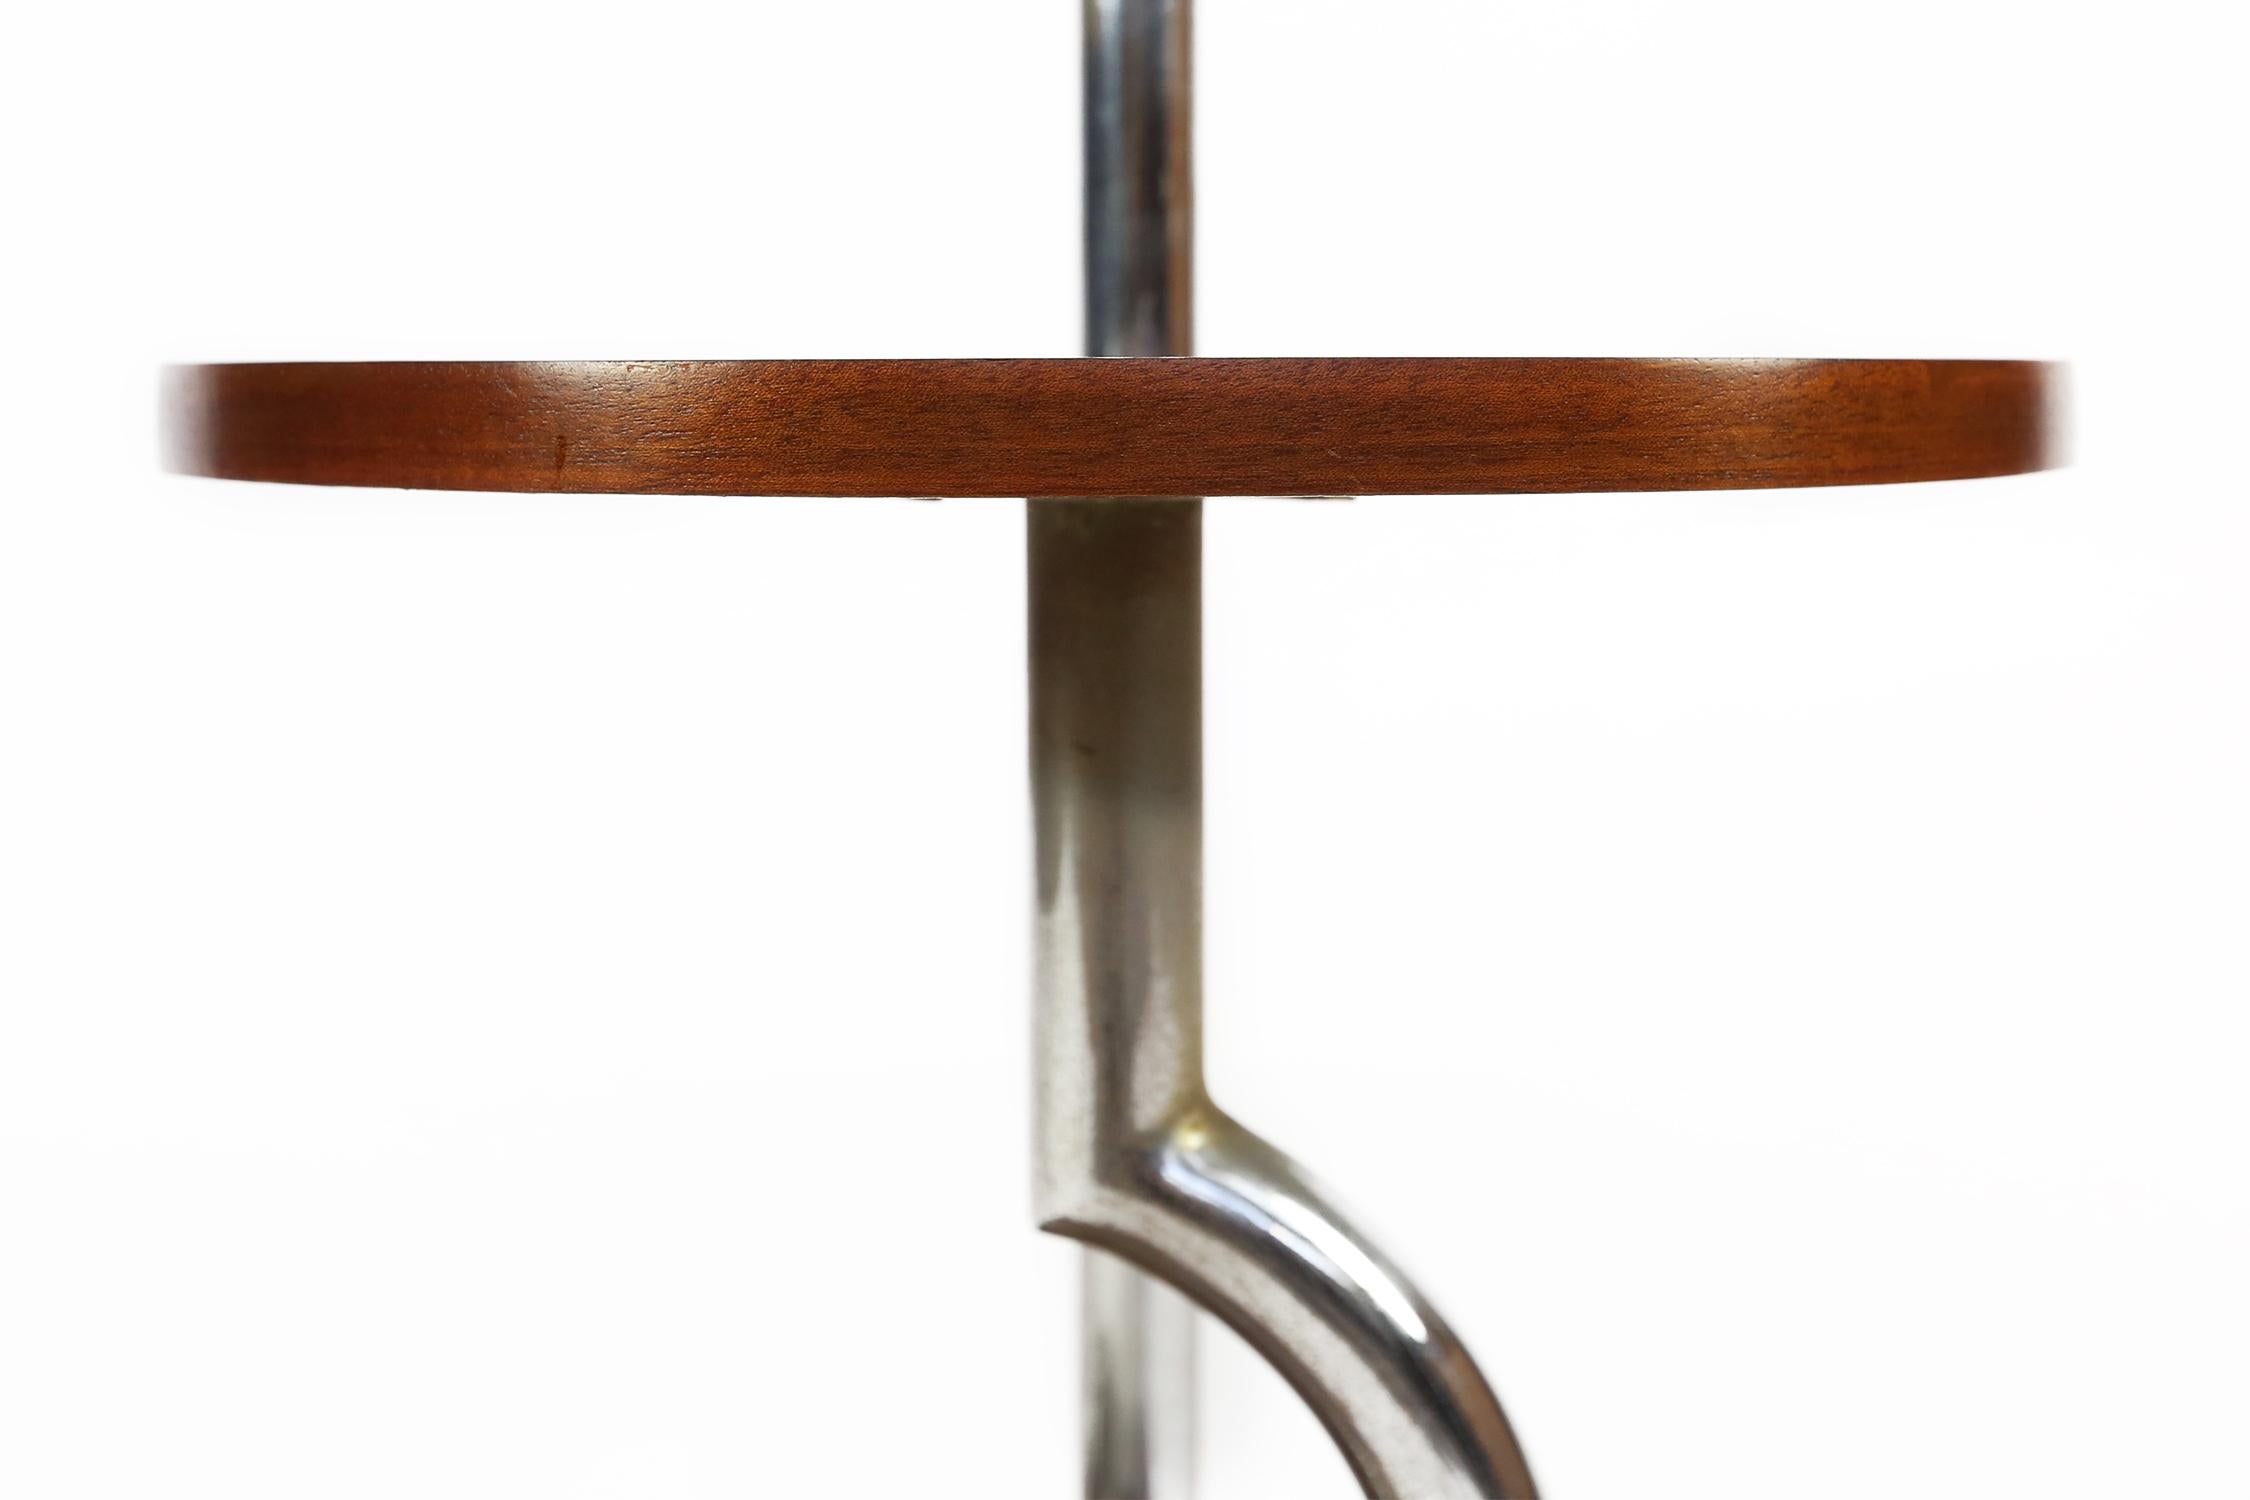 Chrome Art Deco Modernist Tubular Table Gueridon or Plant Stand, French, 1930s For Sale